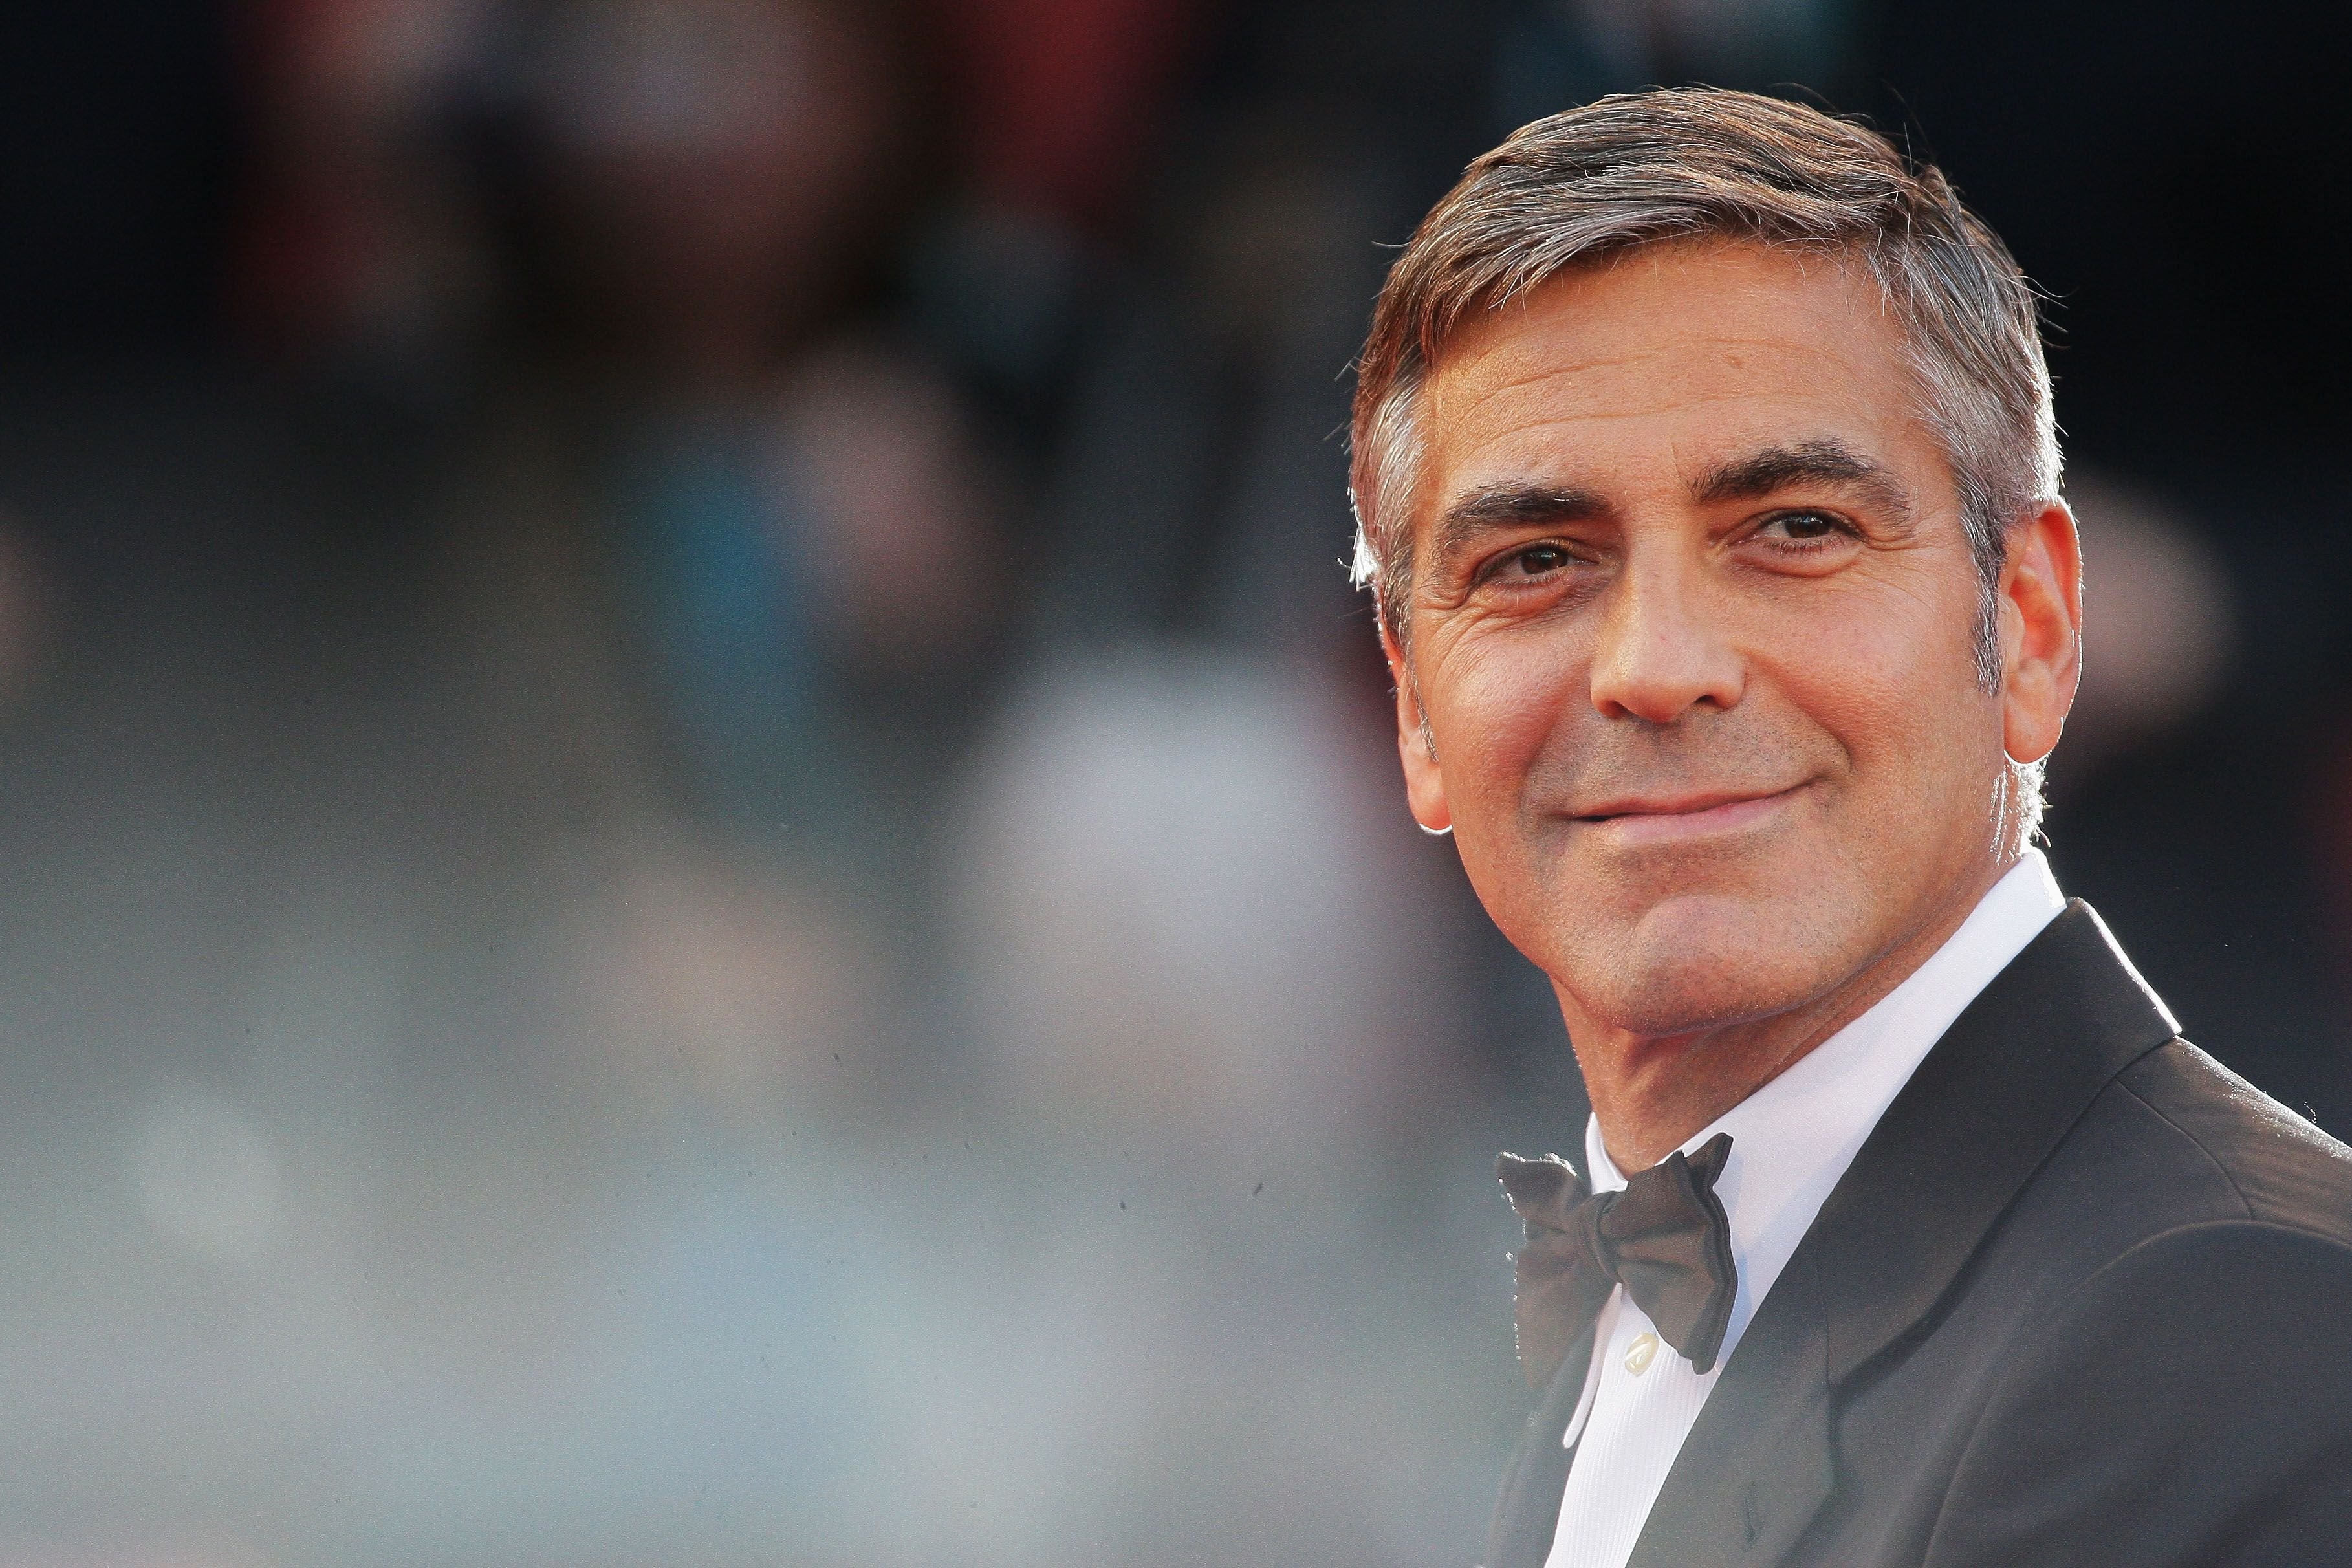  George Clooney during "The Men Who Stare At Goats" premiere at the Sala Grande during the 66th Venice Film Festival on September 8, 2009 in Venice, Italy. | Source: Getty Images